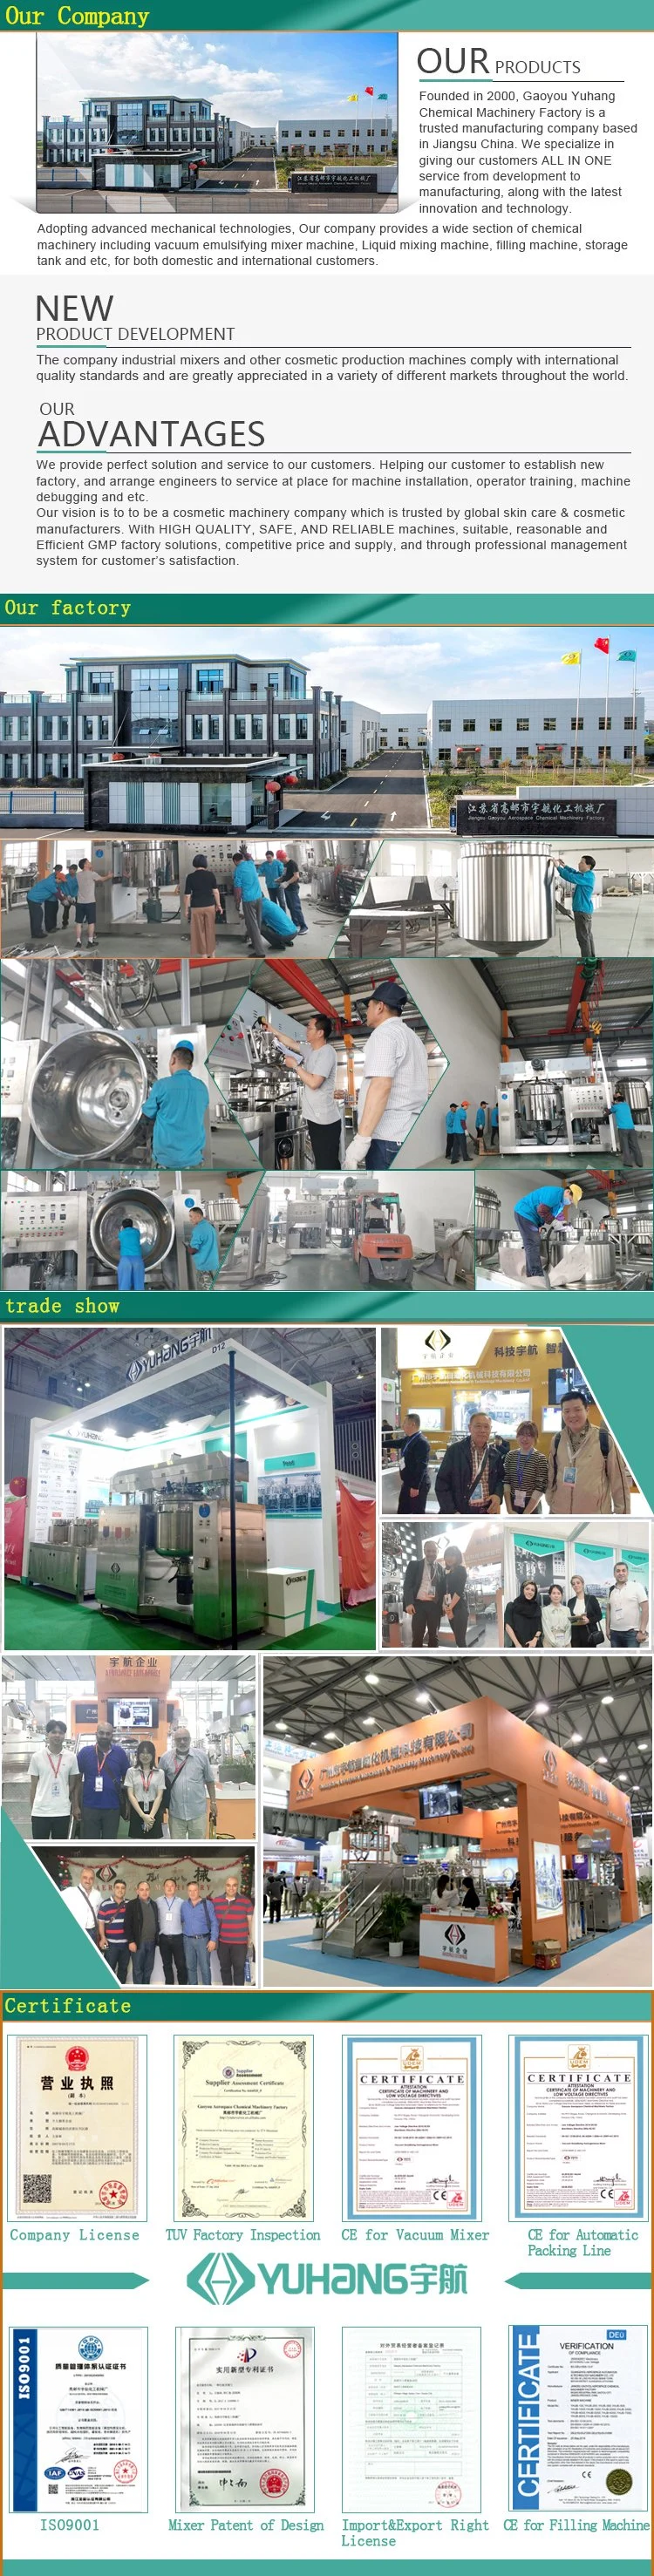 Automatic Plastic Tube Filling Machine Sealing with Competitive Price